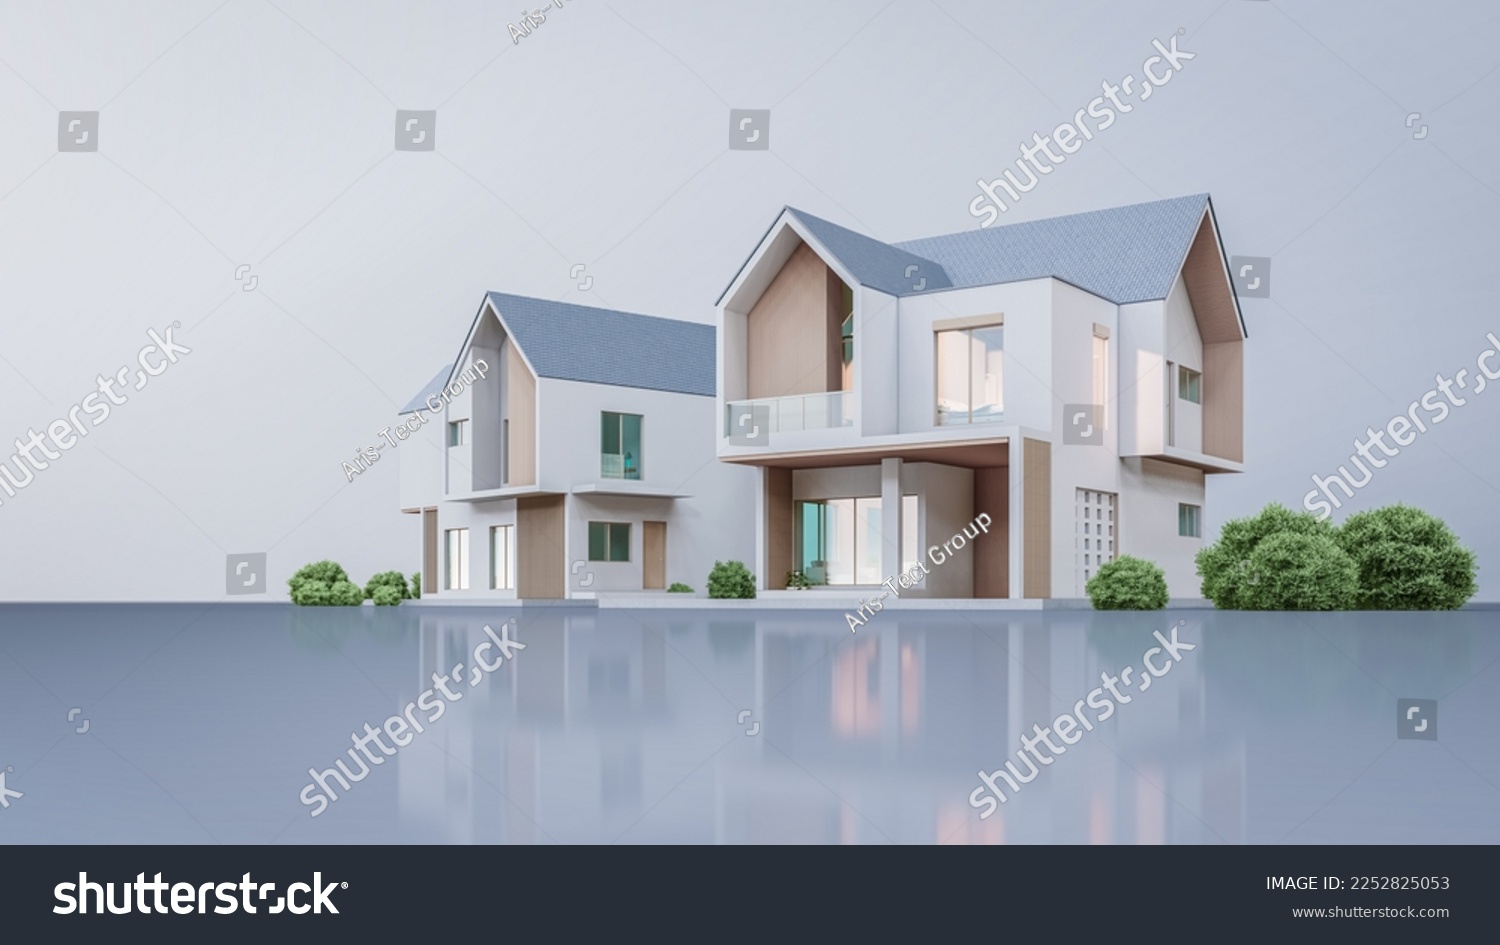 Architecture 3d rendering illustration of modern minimal house on white background #2252825053